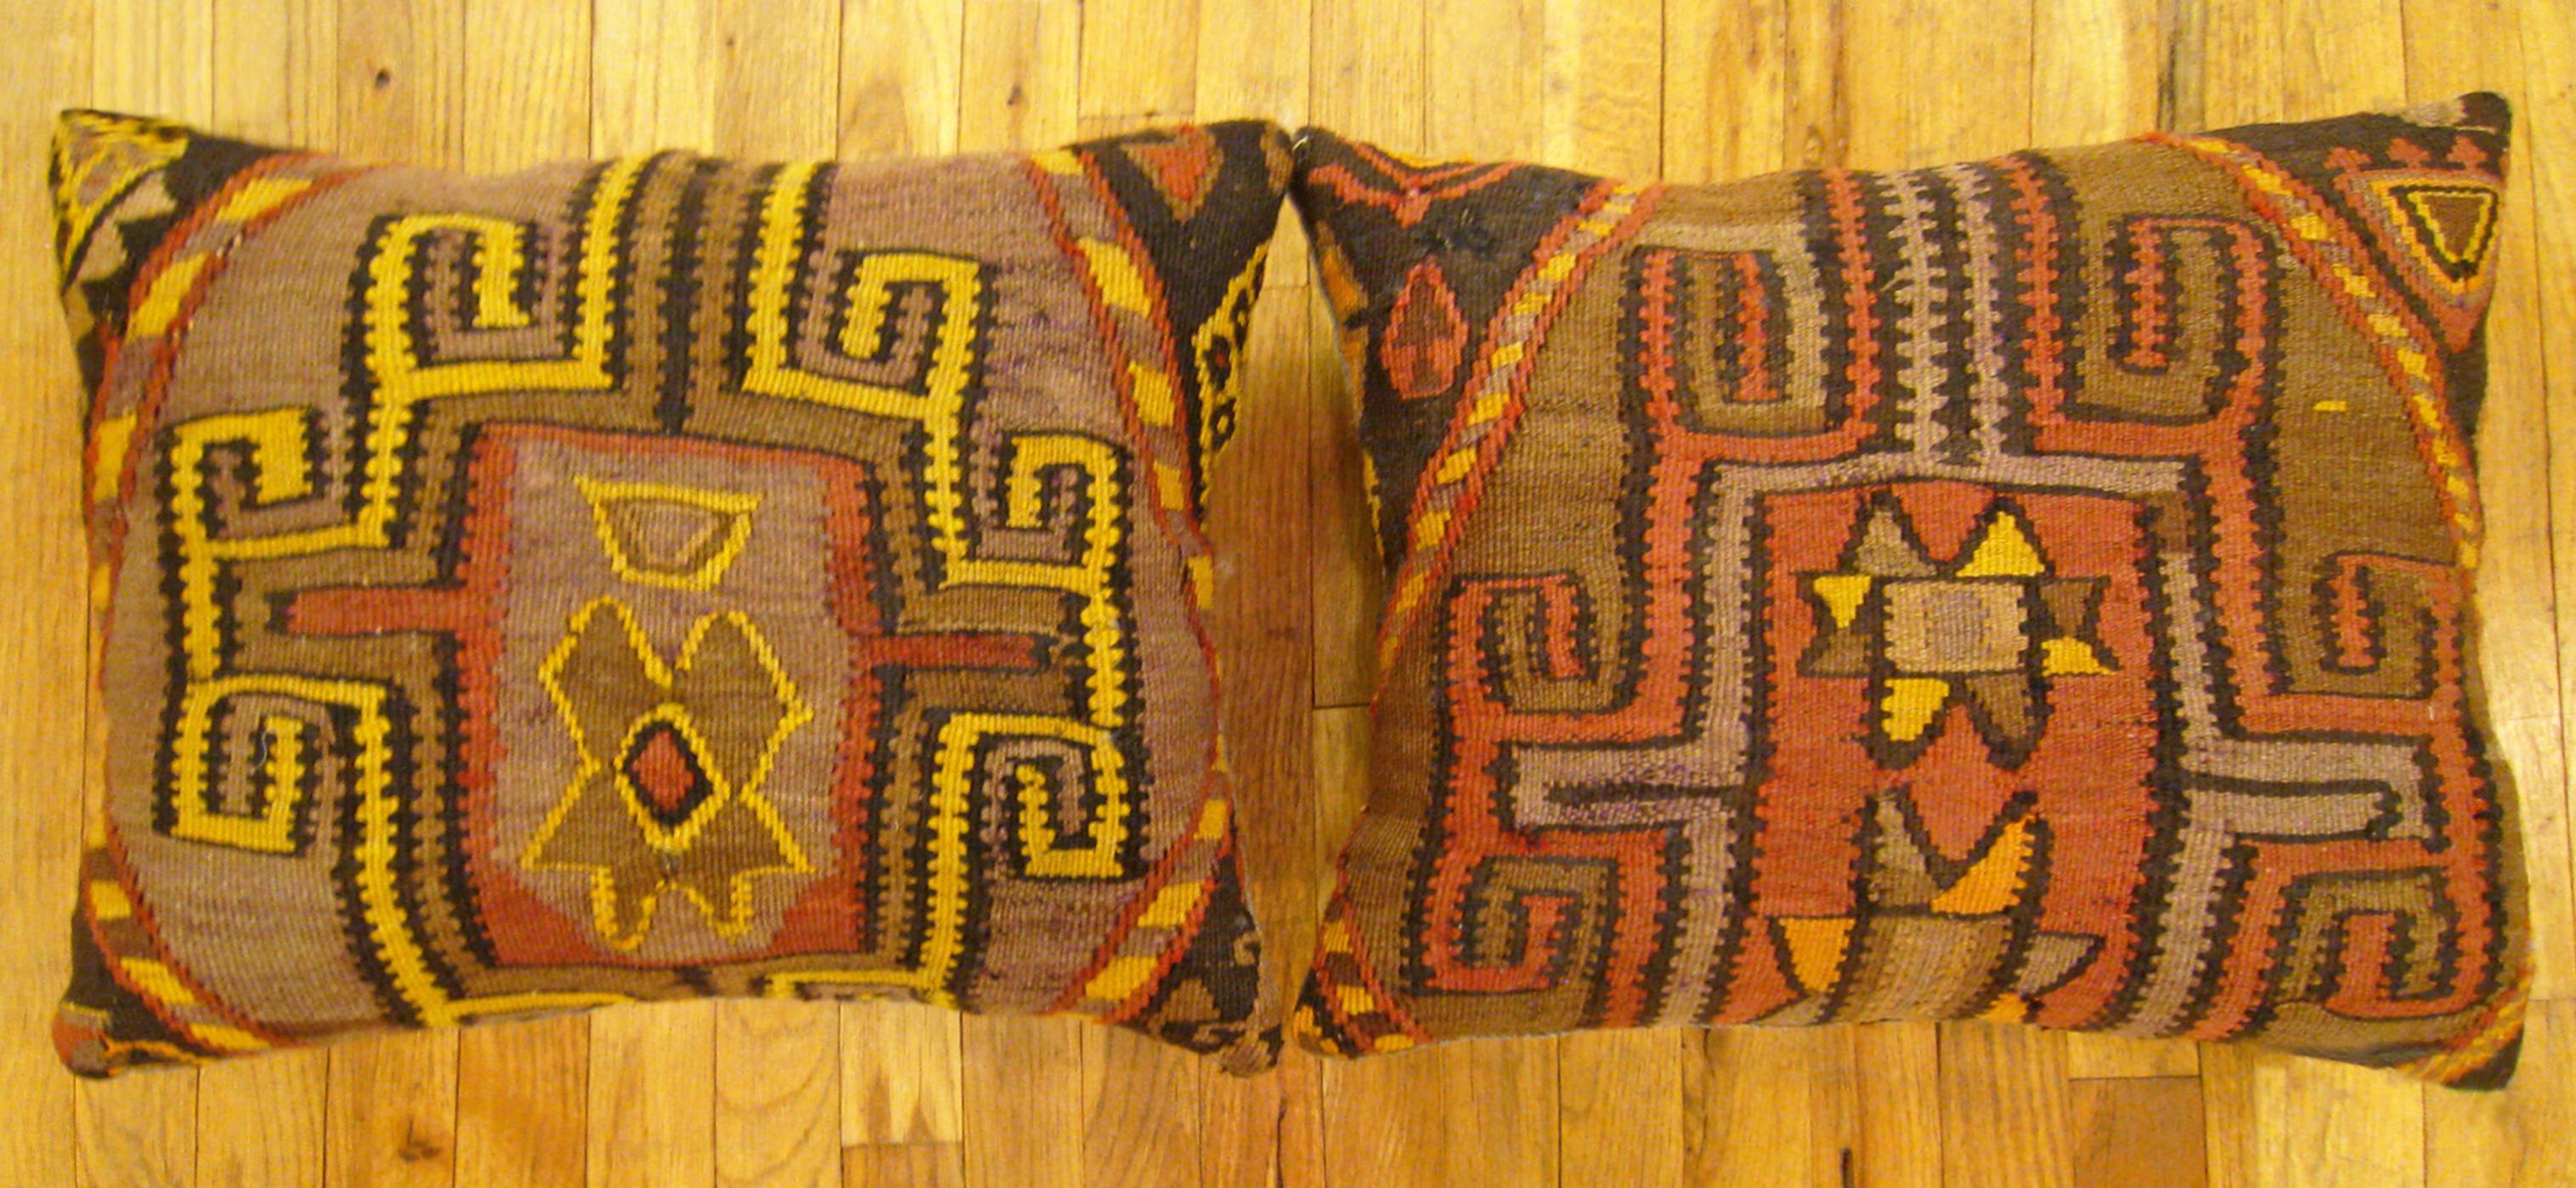 A pair of Vintage Turkish Kilim Rug Pillows; size 22” x 18” each.

A vintage decorative pillows with geometric abstracts allover a brown central field, size 22” x 18” each. This lovely decorative pillow features a vintage fabric of a KIilim carpet